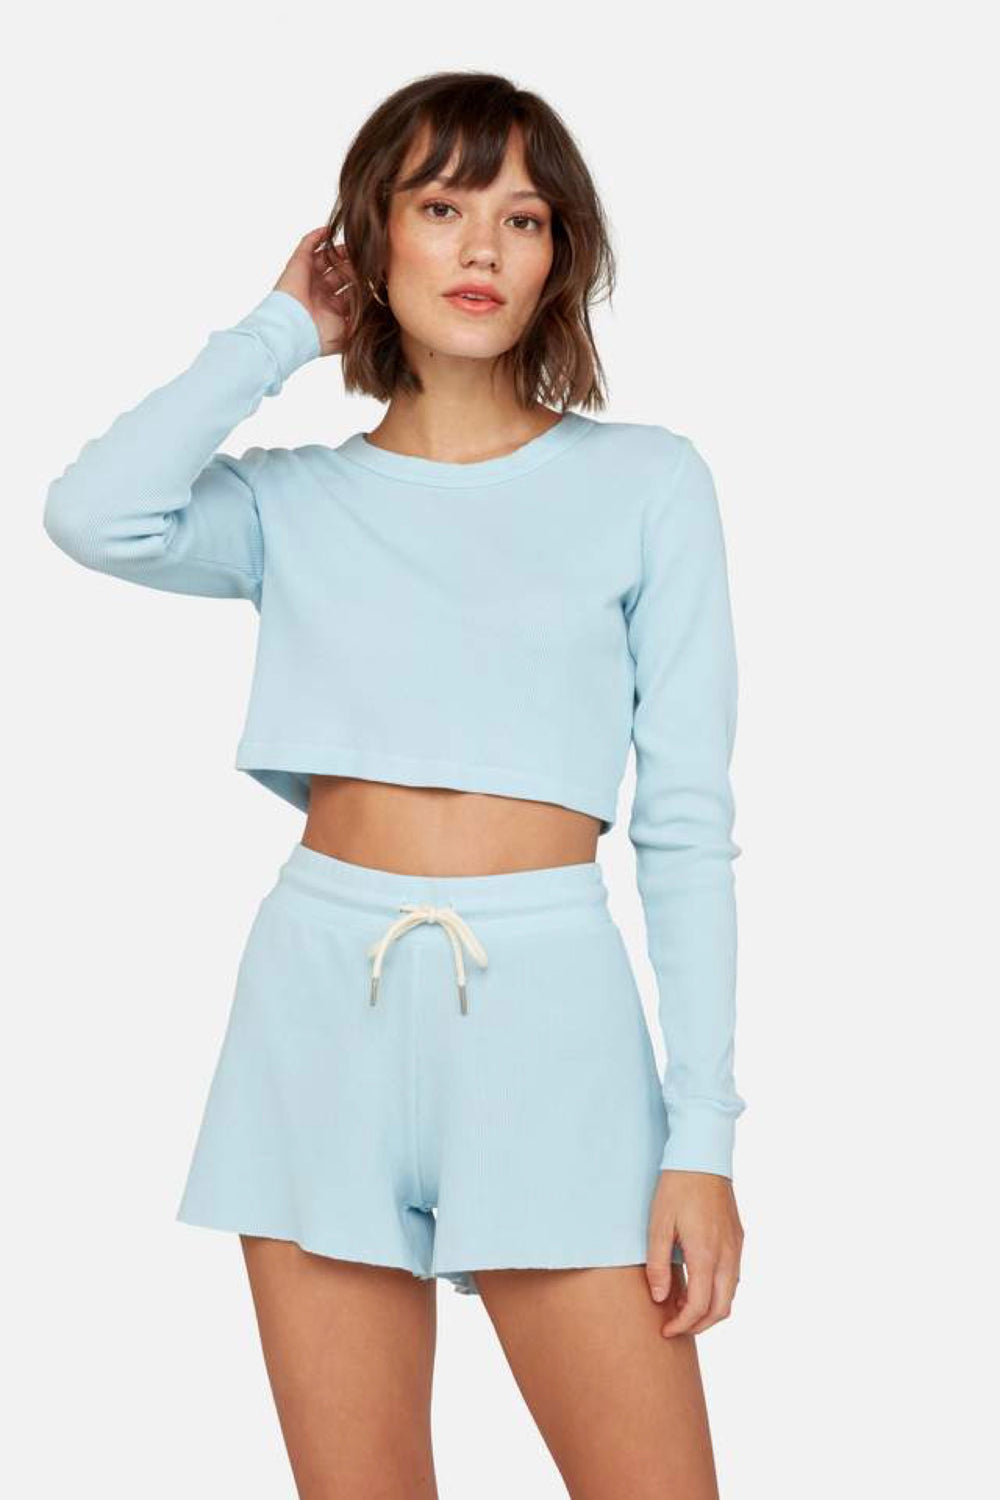 Pale Blue Lincoln Thermal Shorts